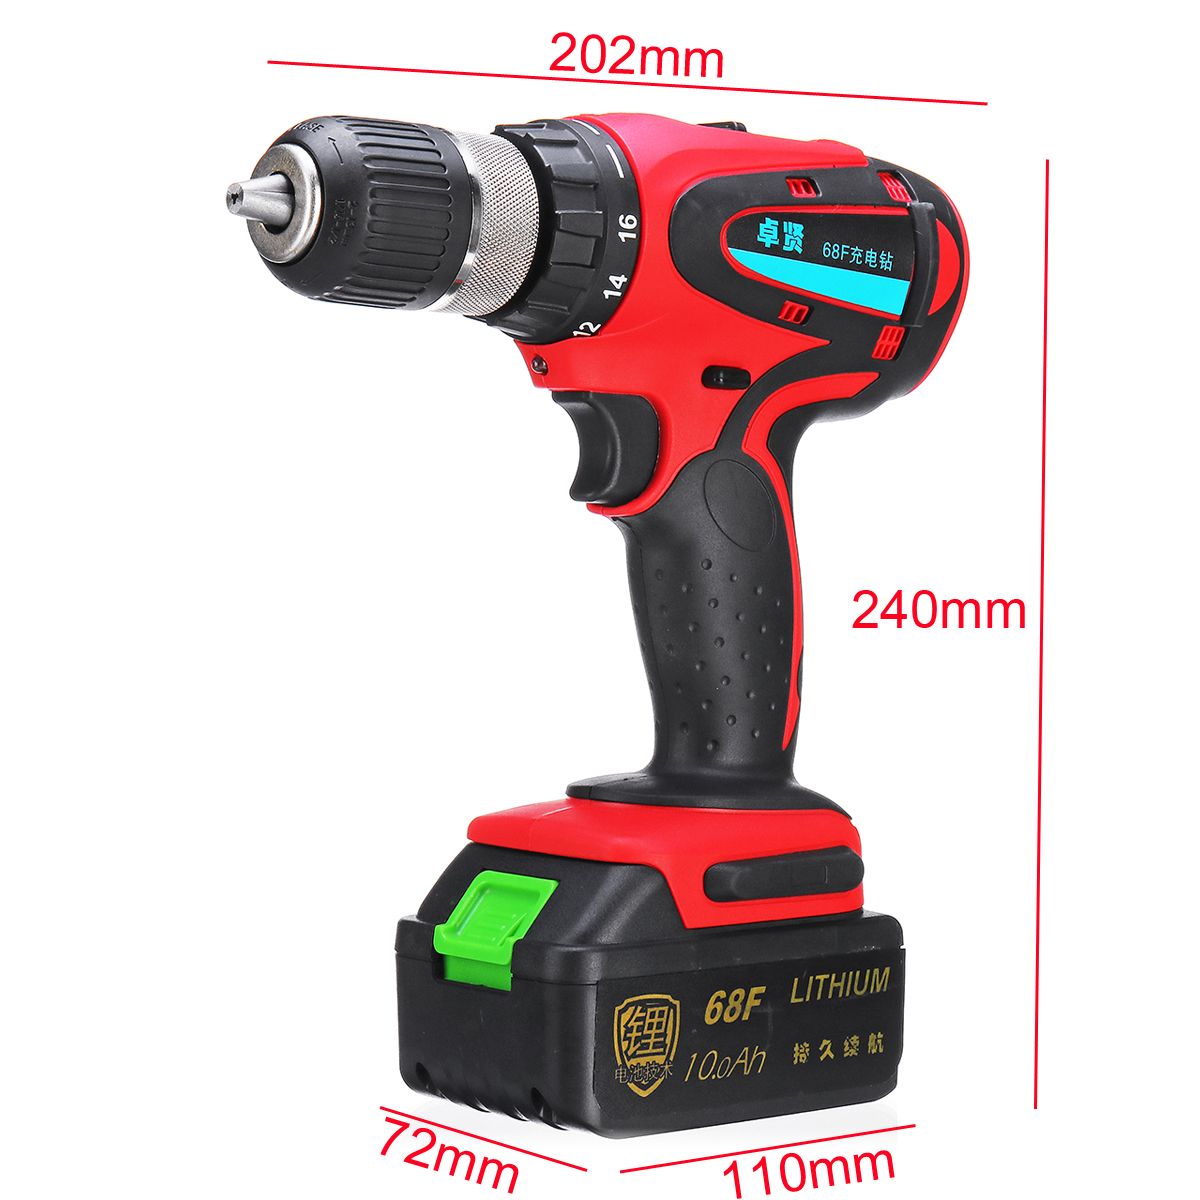 68V-10Ah-Cordless-Rechargeable-Electric-Drill-2-Speed-Heavy-Duty-Torque-Power-Drills-1403940